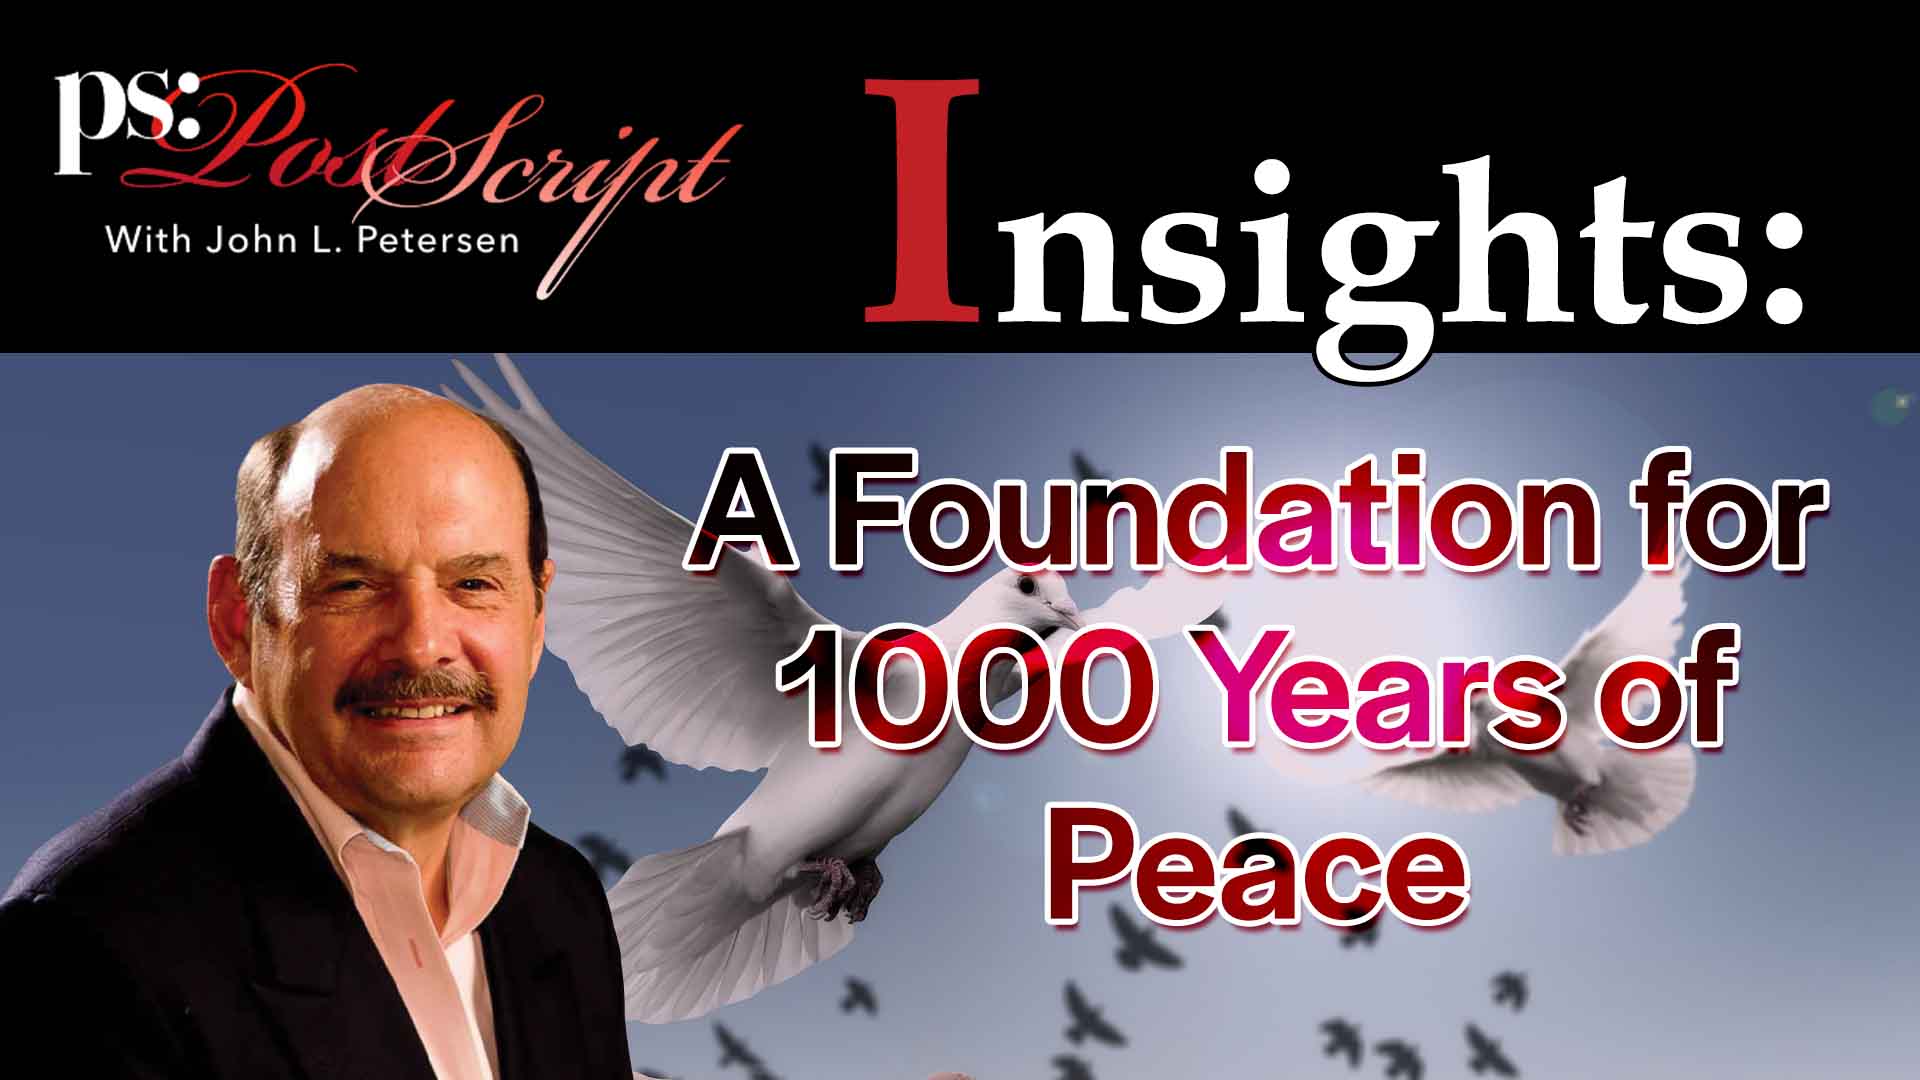 A Foundation for 1000 Years of Peace - PostScript Insight with John L. Petersen